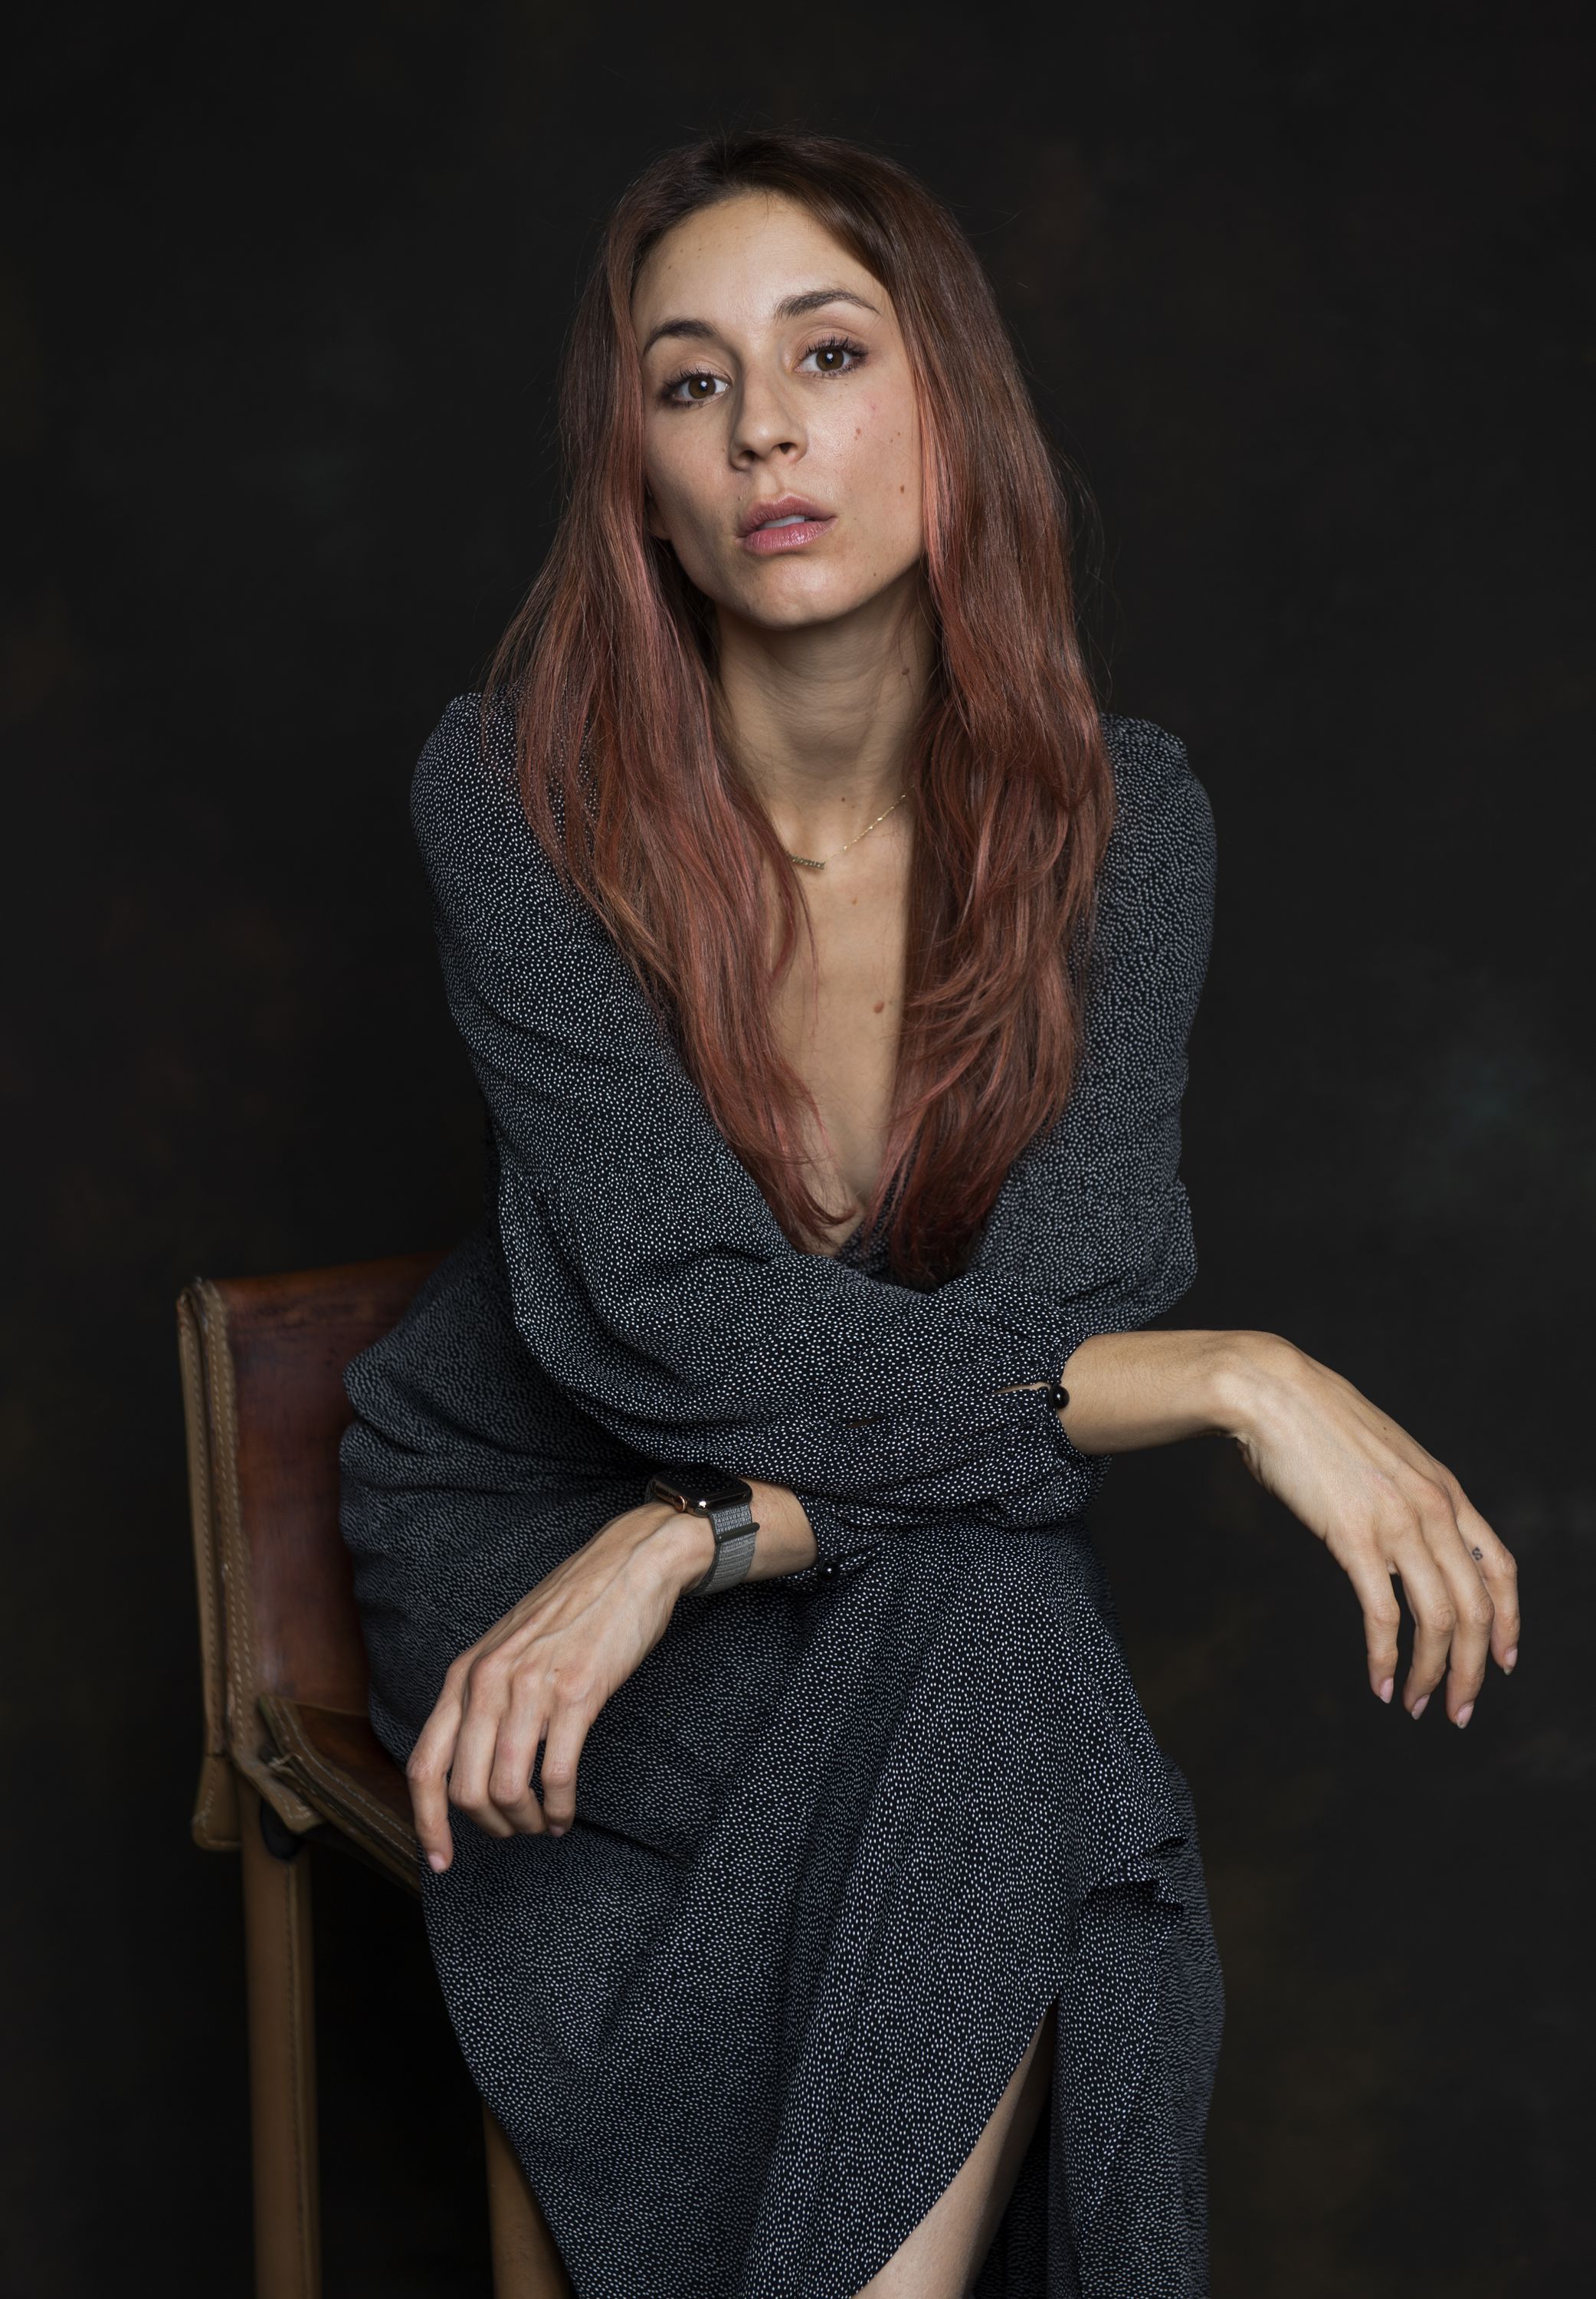 Troian Bellisario poses for a portrait at the 16th Annual Oscar-Qualifying HollyShorts Film Festival on November 6, 2020, in Los Angeles, California | Source: Getty Images